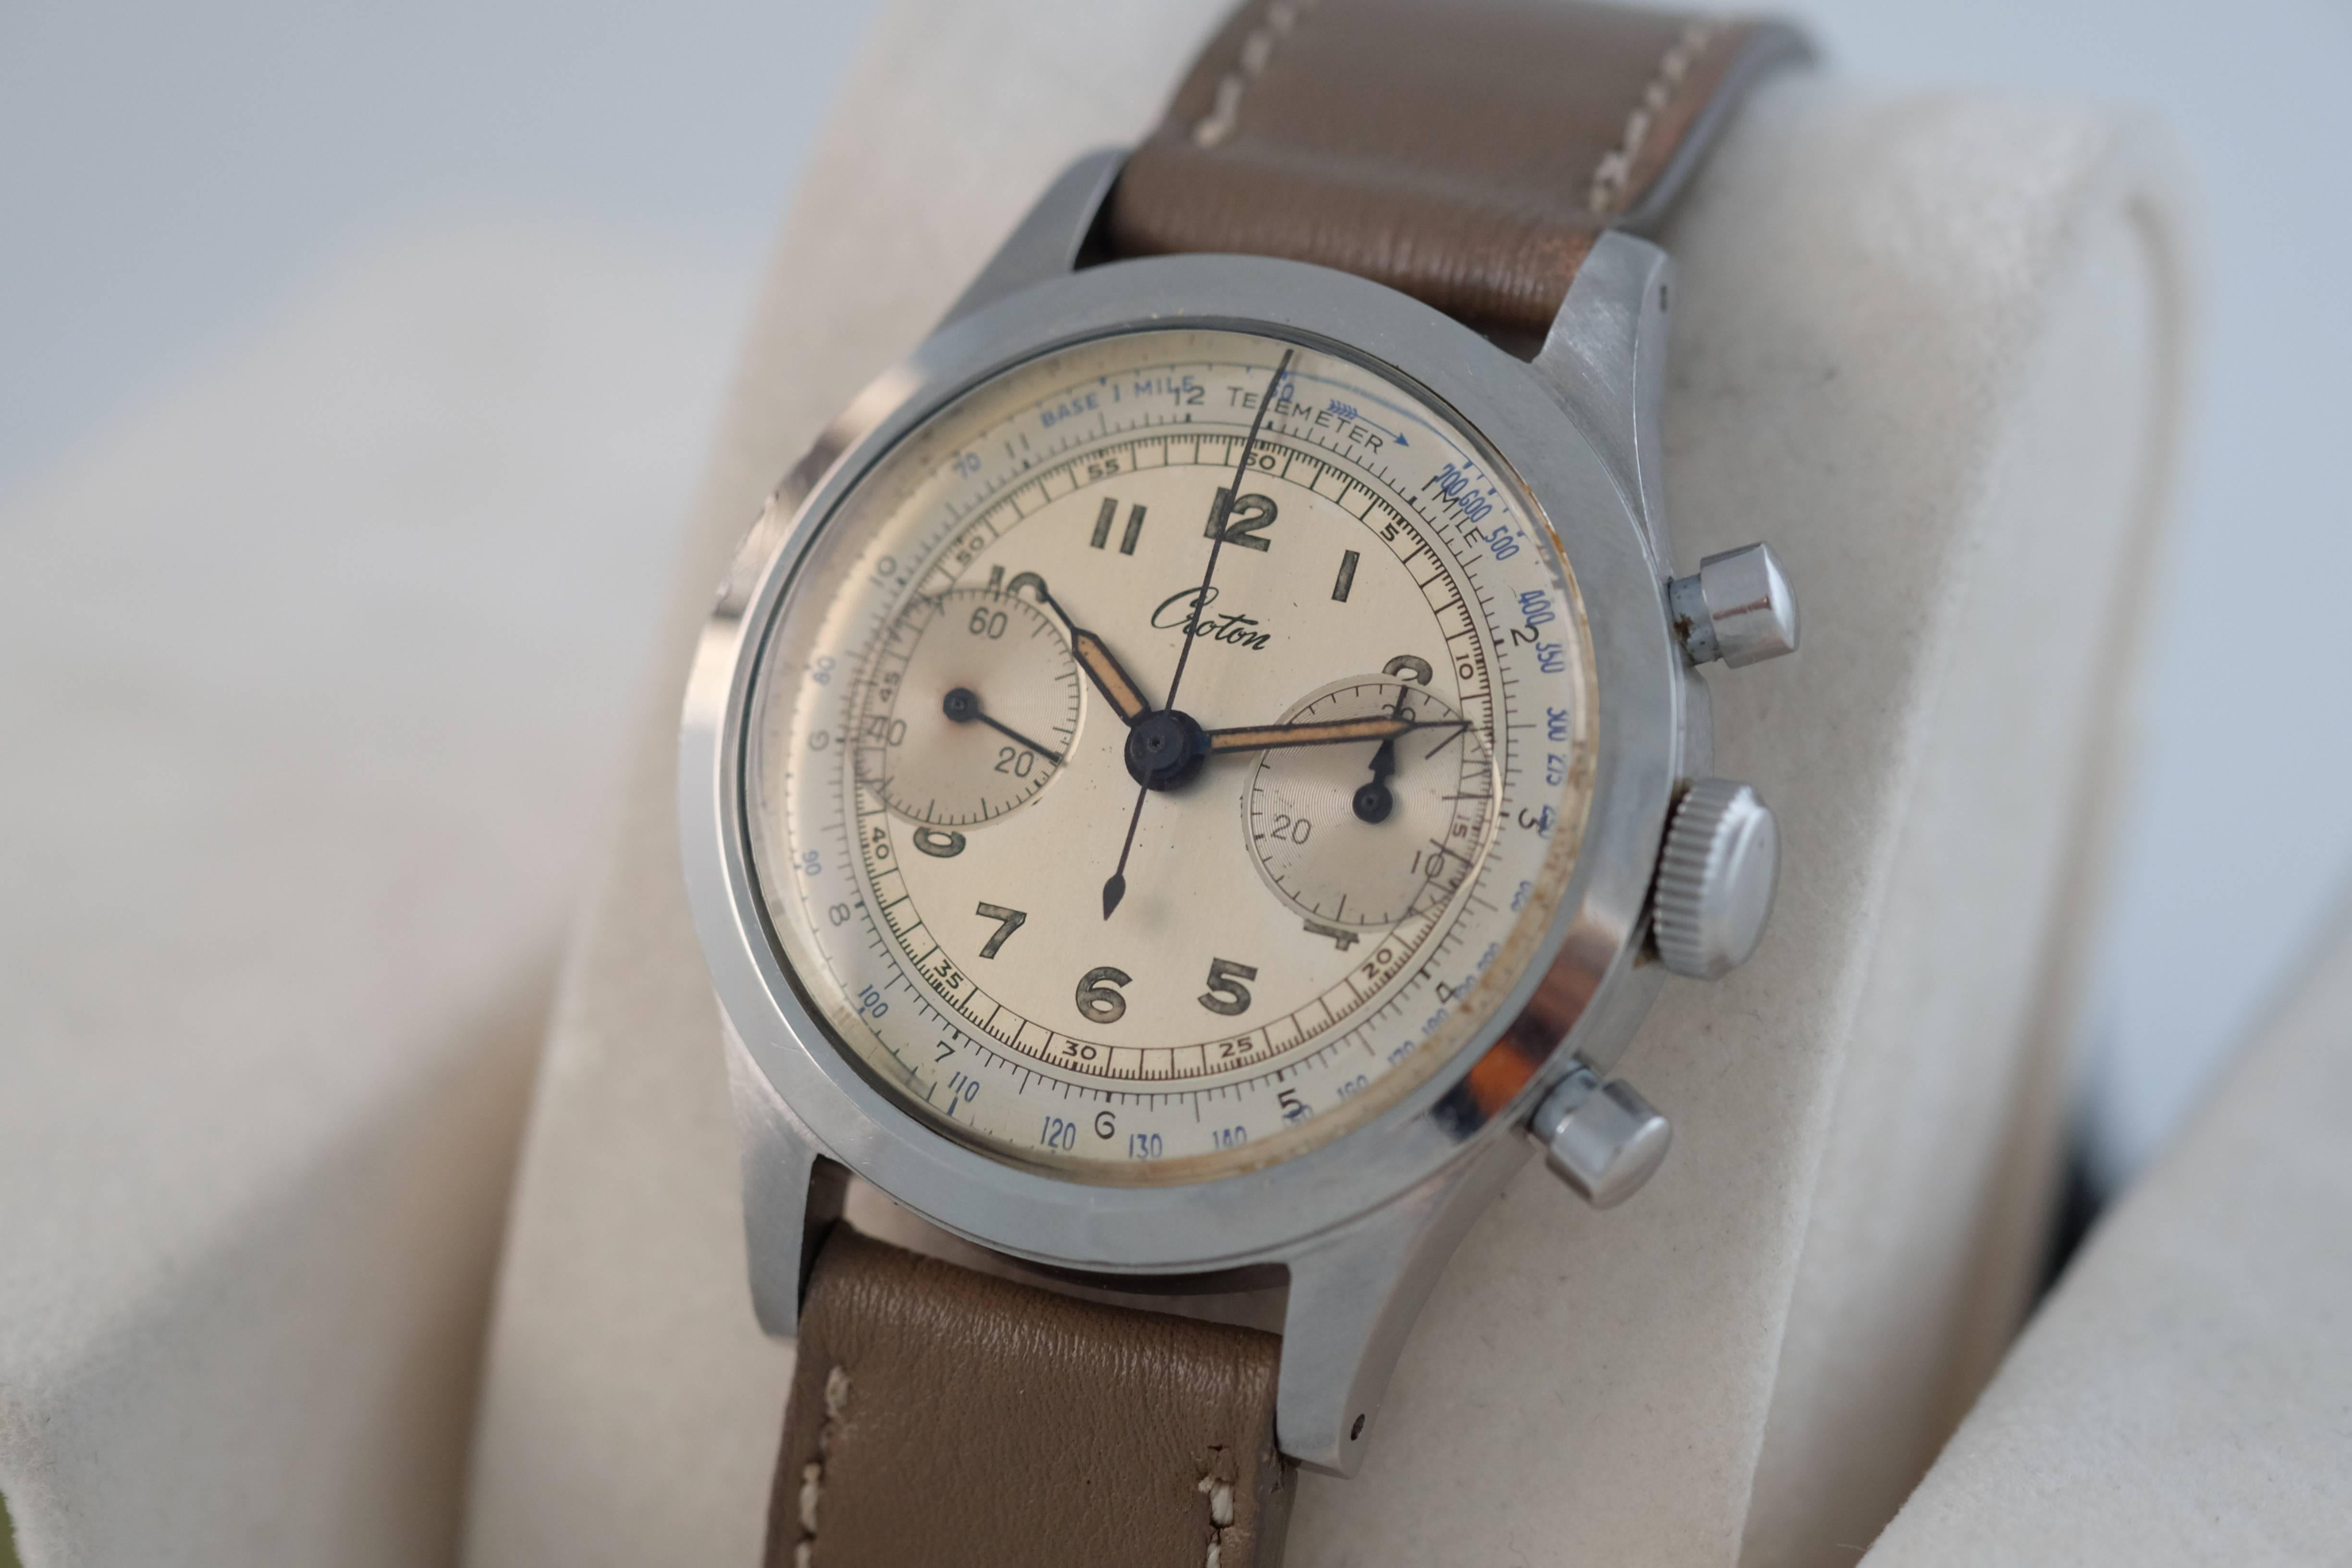 Croton. A Stainless Steel Clamshell Chronograph with Tachometer and Telemeter Scales

Case No: 886xxx

Circa: 1950’s

Mechanical jeweled movement, two-tone silvered dial, luminous Arabic numerals, luminous hands, railway minute divisions,